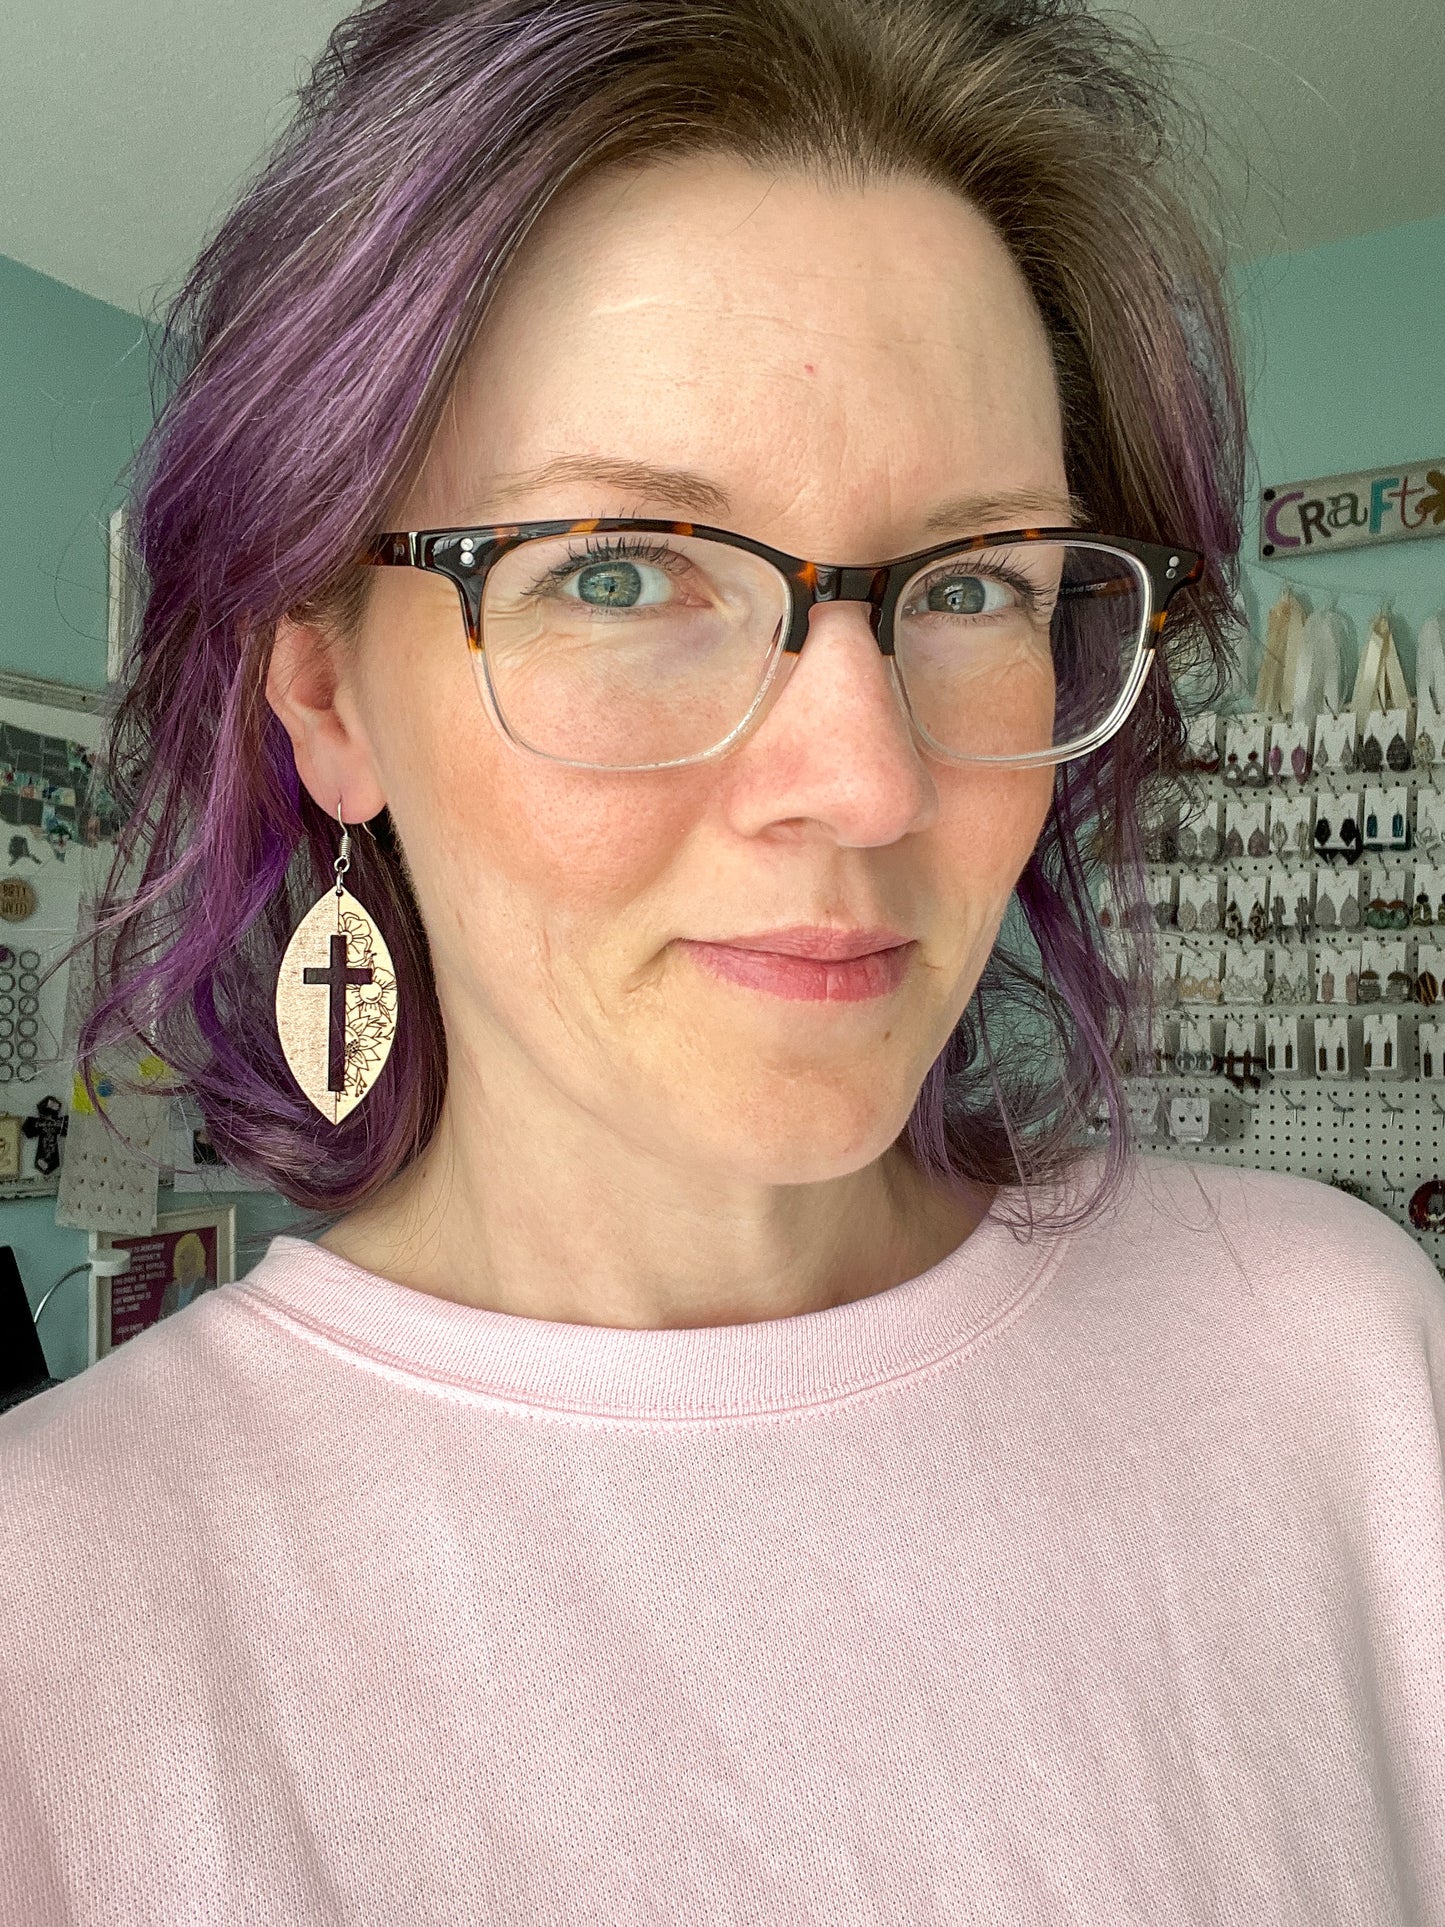 Rose Gold & Birch Wood Floral Cross Earrings: Choose From 3 Designs